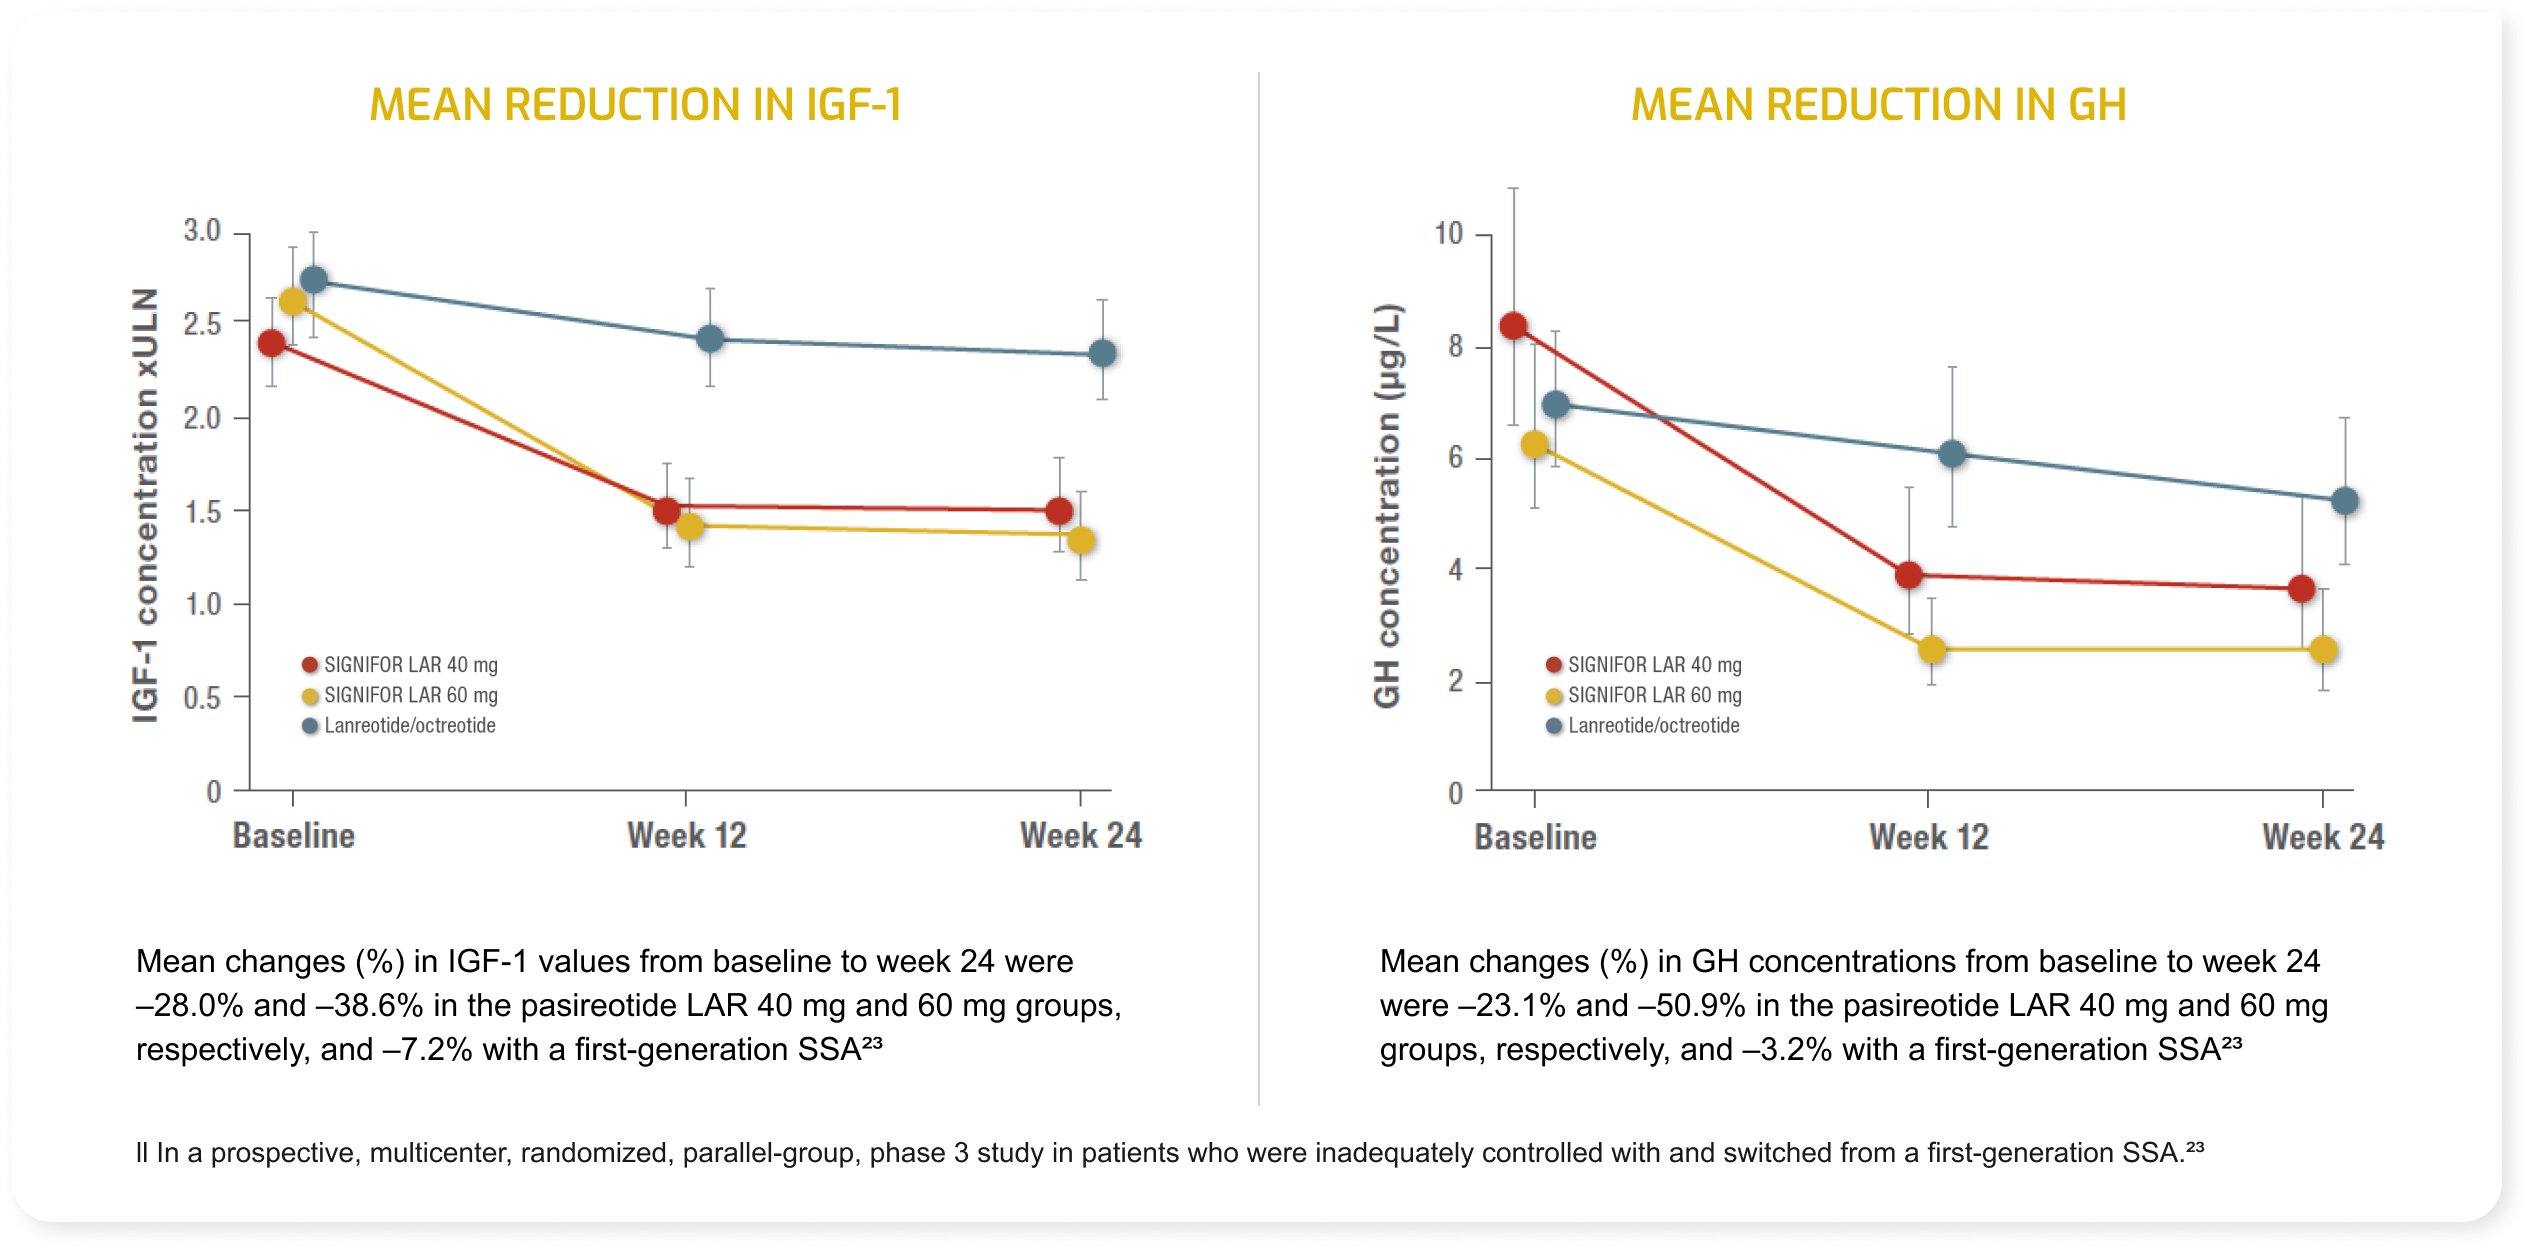 Mean Reduction in IGF-1 and GH charts